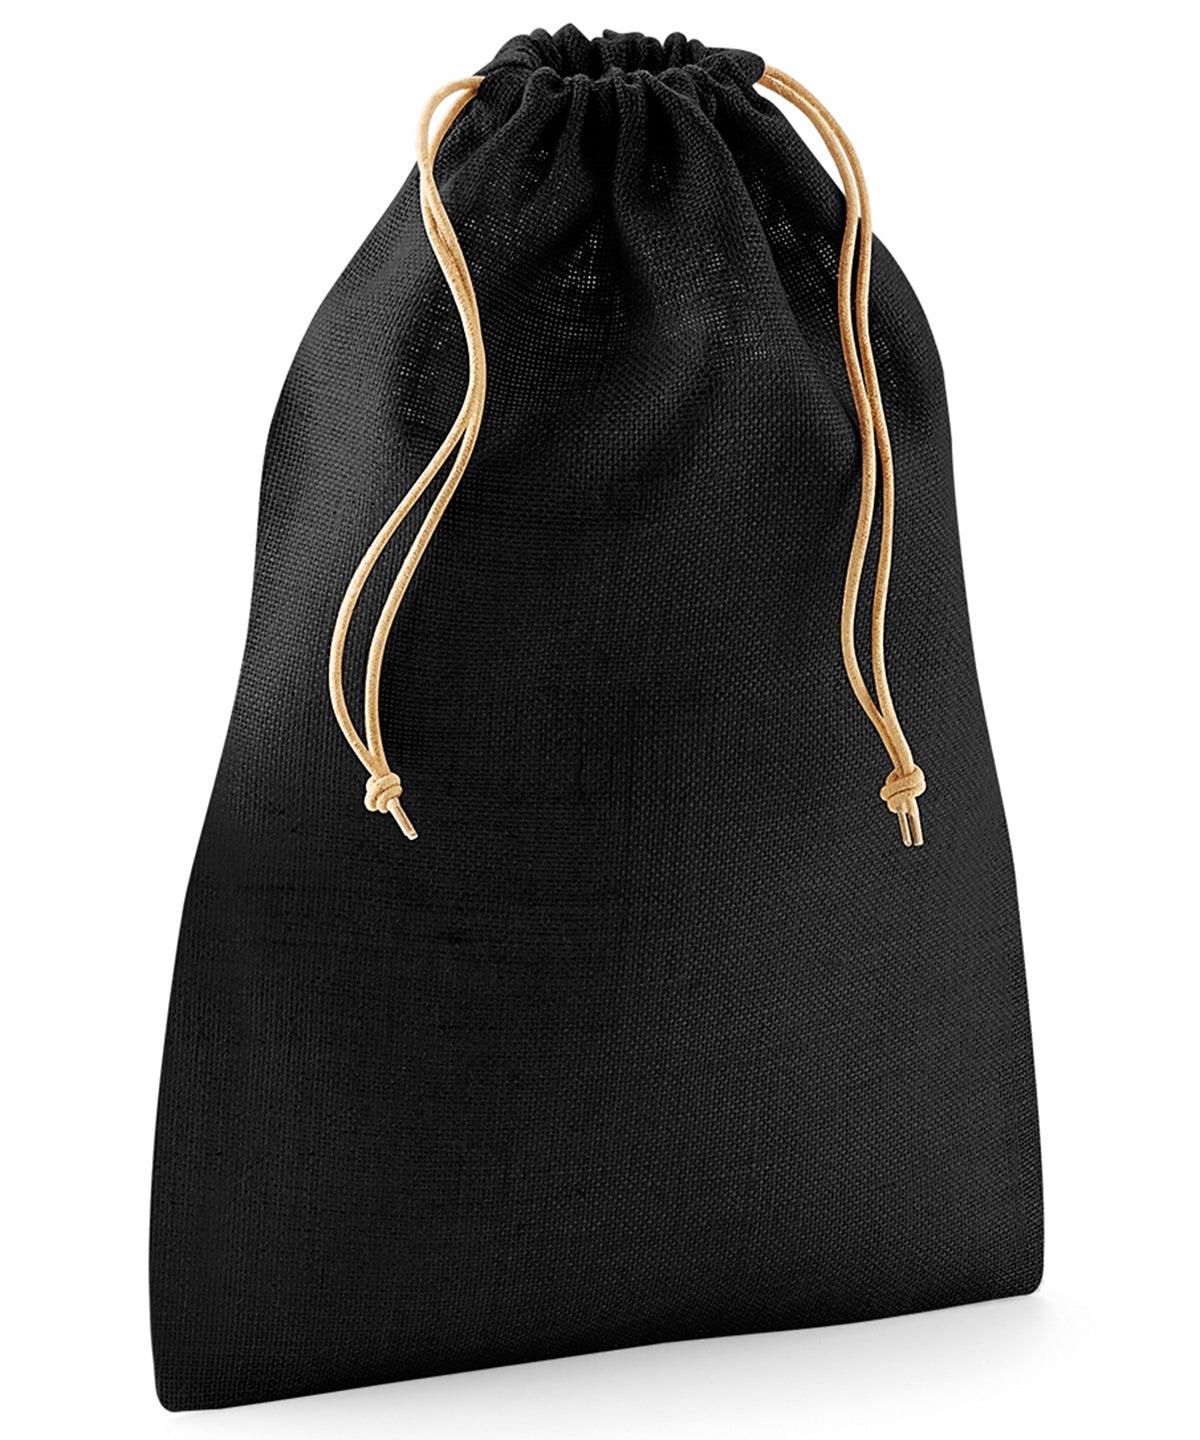 Black/Natural - Jute stuff bag Bags Westford Mill Bags & Luggage, New Colours for 2021 Schoolwear Centres